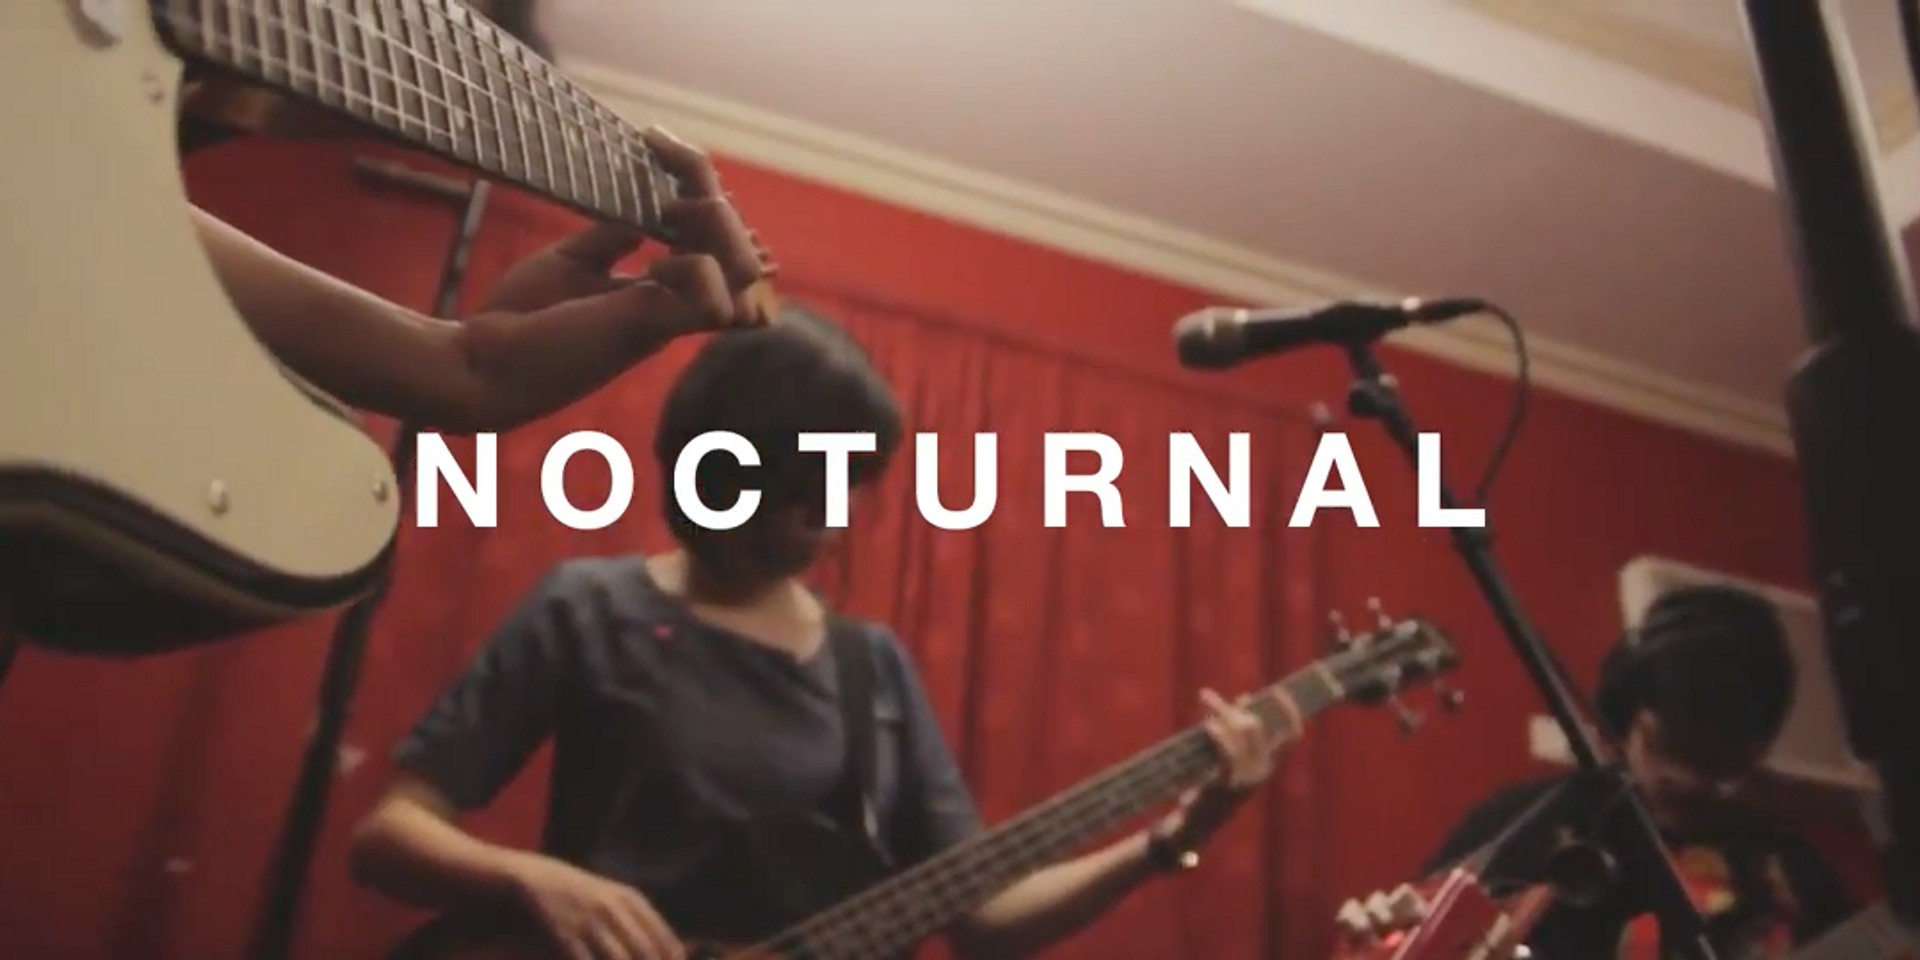 WATCH: Fools and Foes perform 'Nocturnal' live at the Red Room